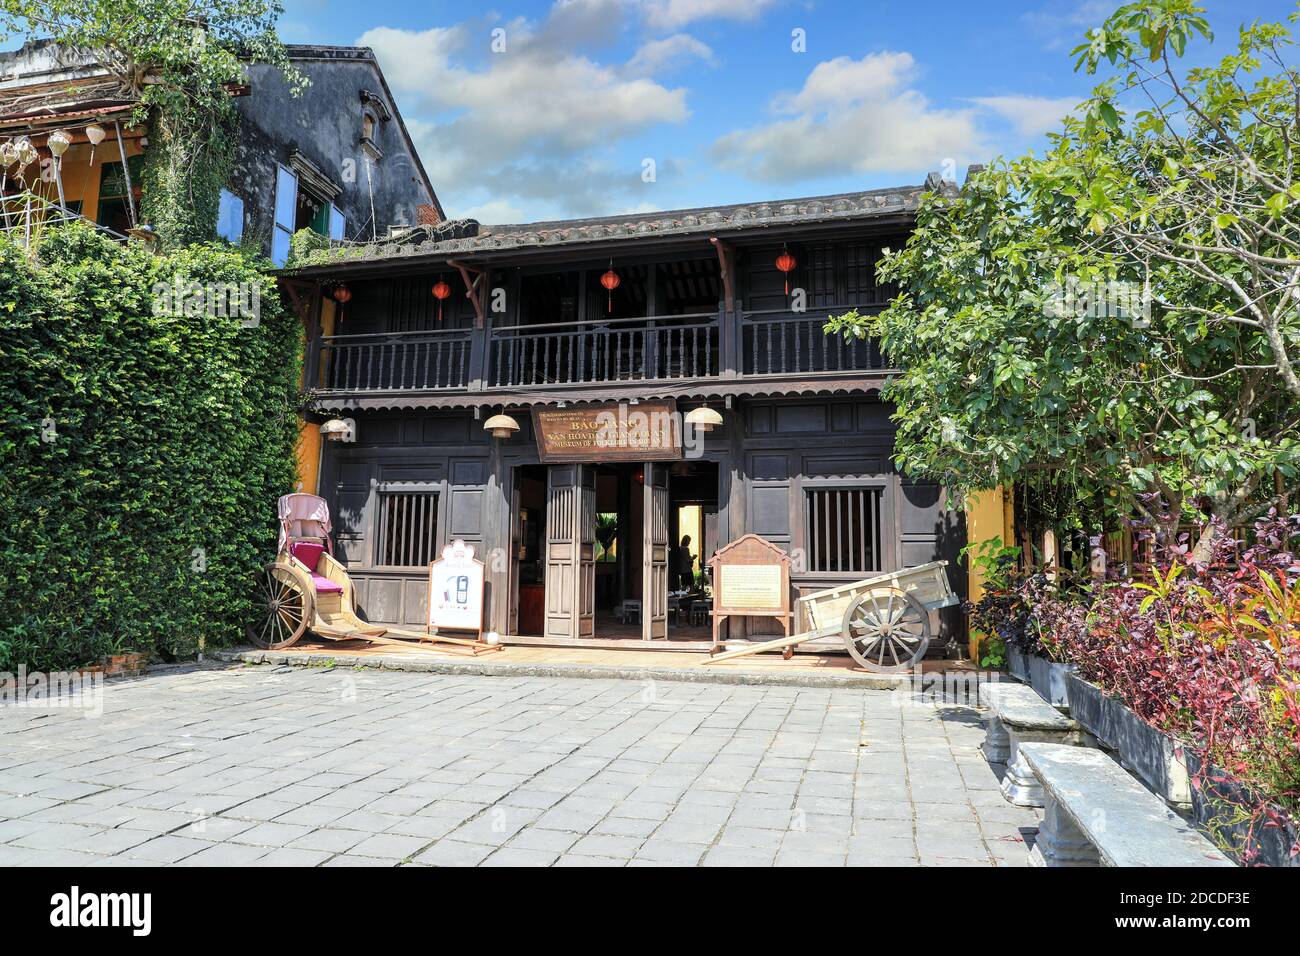 Museum of Folk Culture or folklore in a 150-year-old Chinese trading house, Nguyễn Thái Học street, Hoi An, Vietnam, Asia Stock Photo